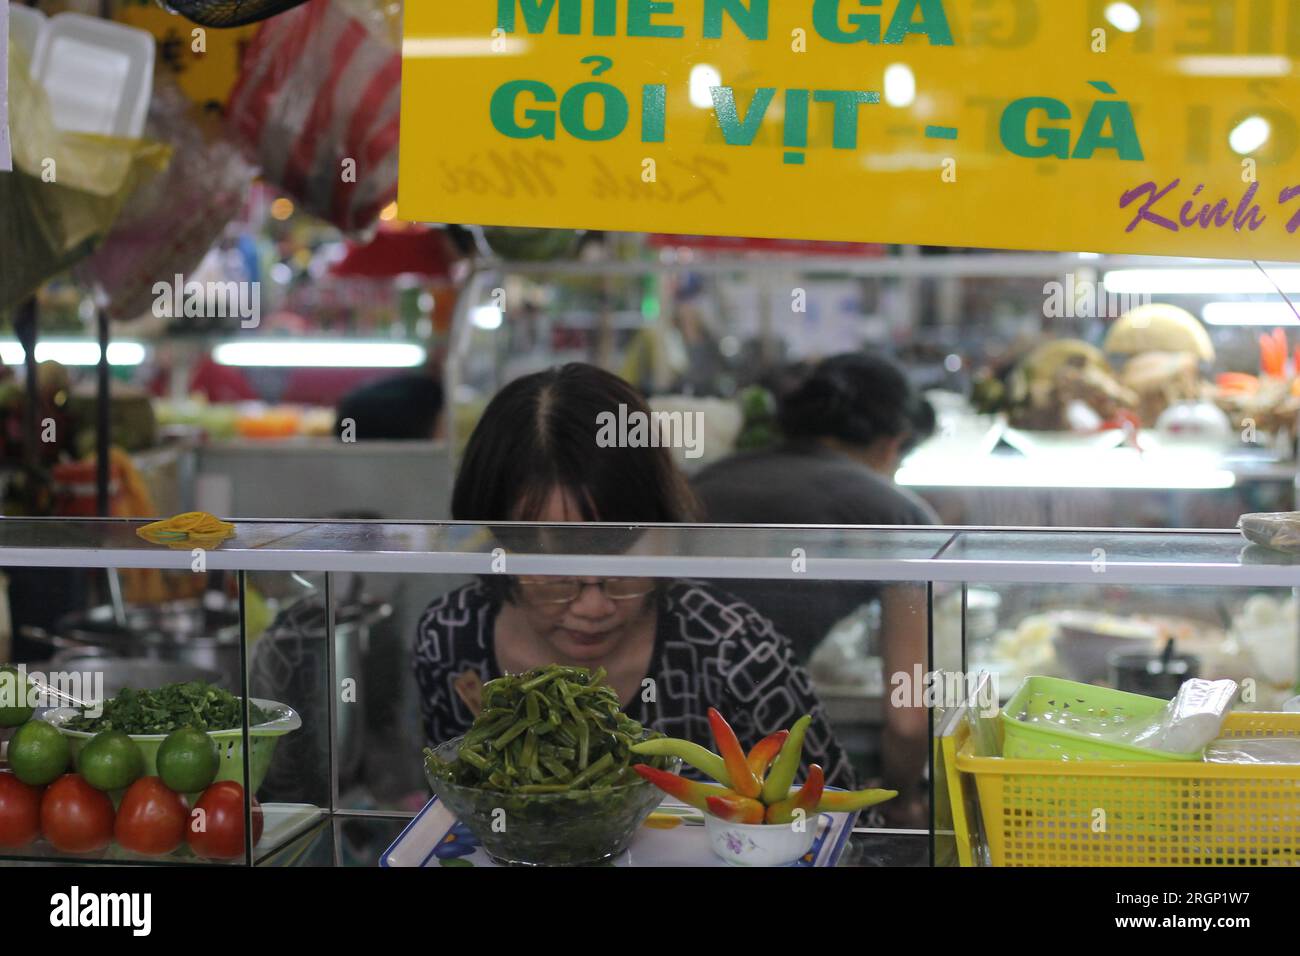 A busy market in Vietname, obscured face serving fresh vegetables Stock Photo